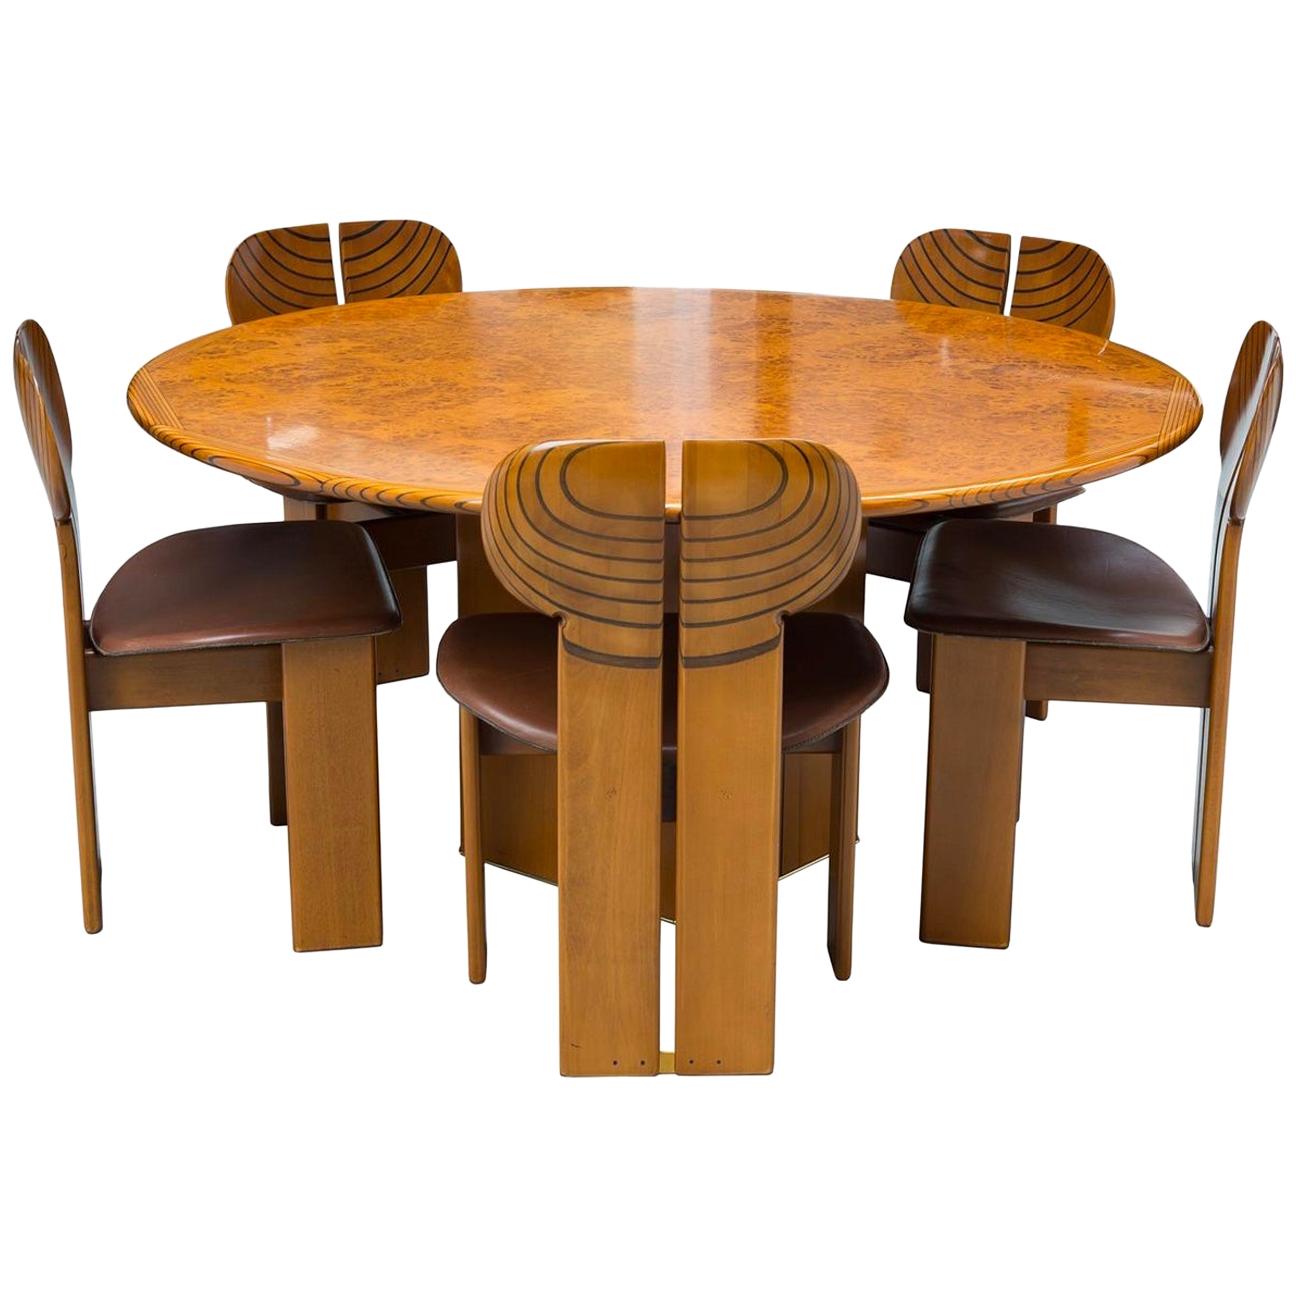 Africa Dining Suite, Afra & Tobia Scarpa, Maxalto, Italy, 1970s-1980s